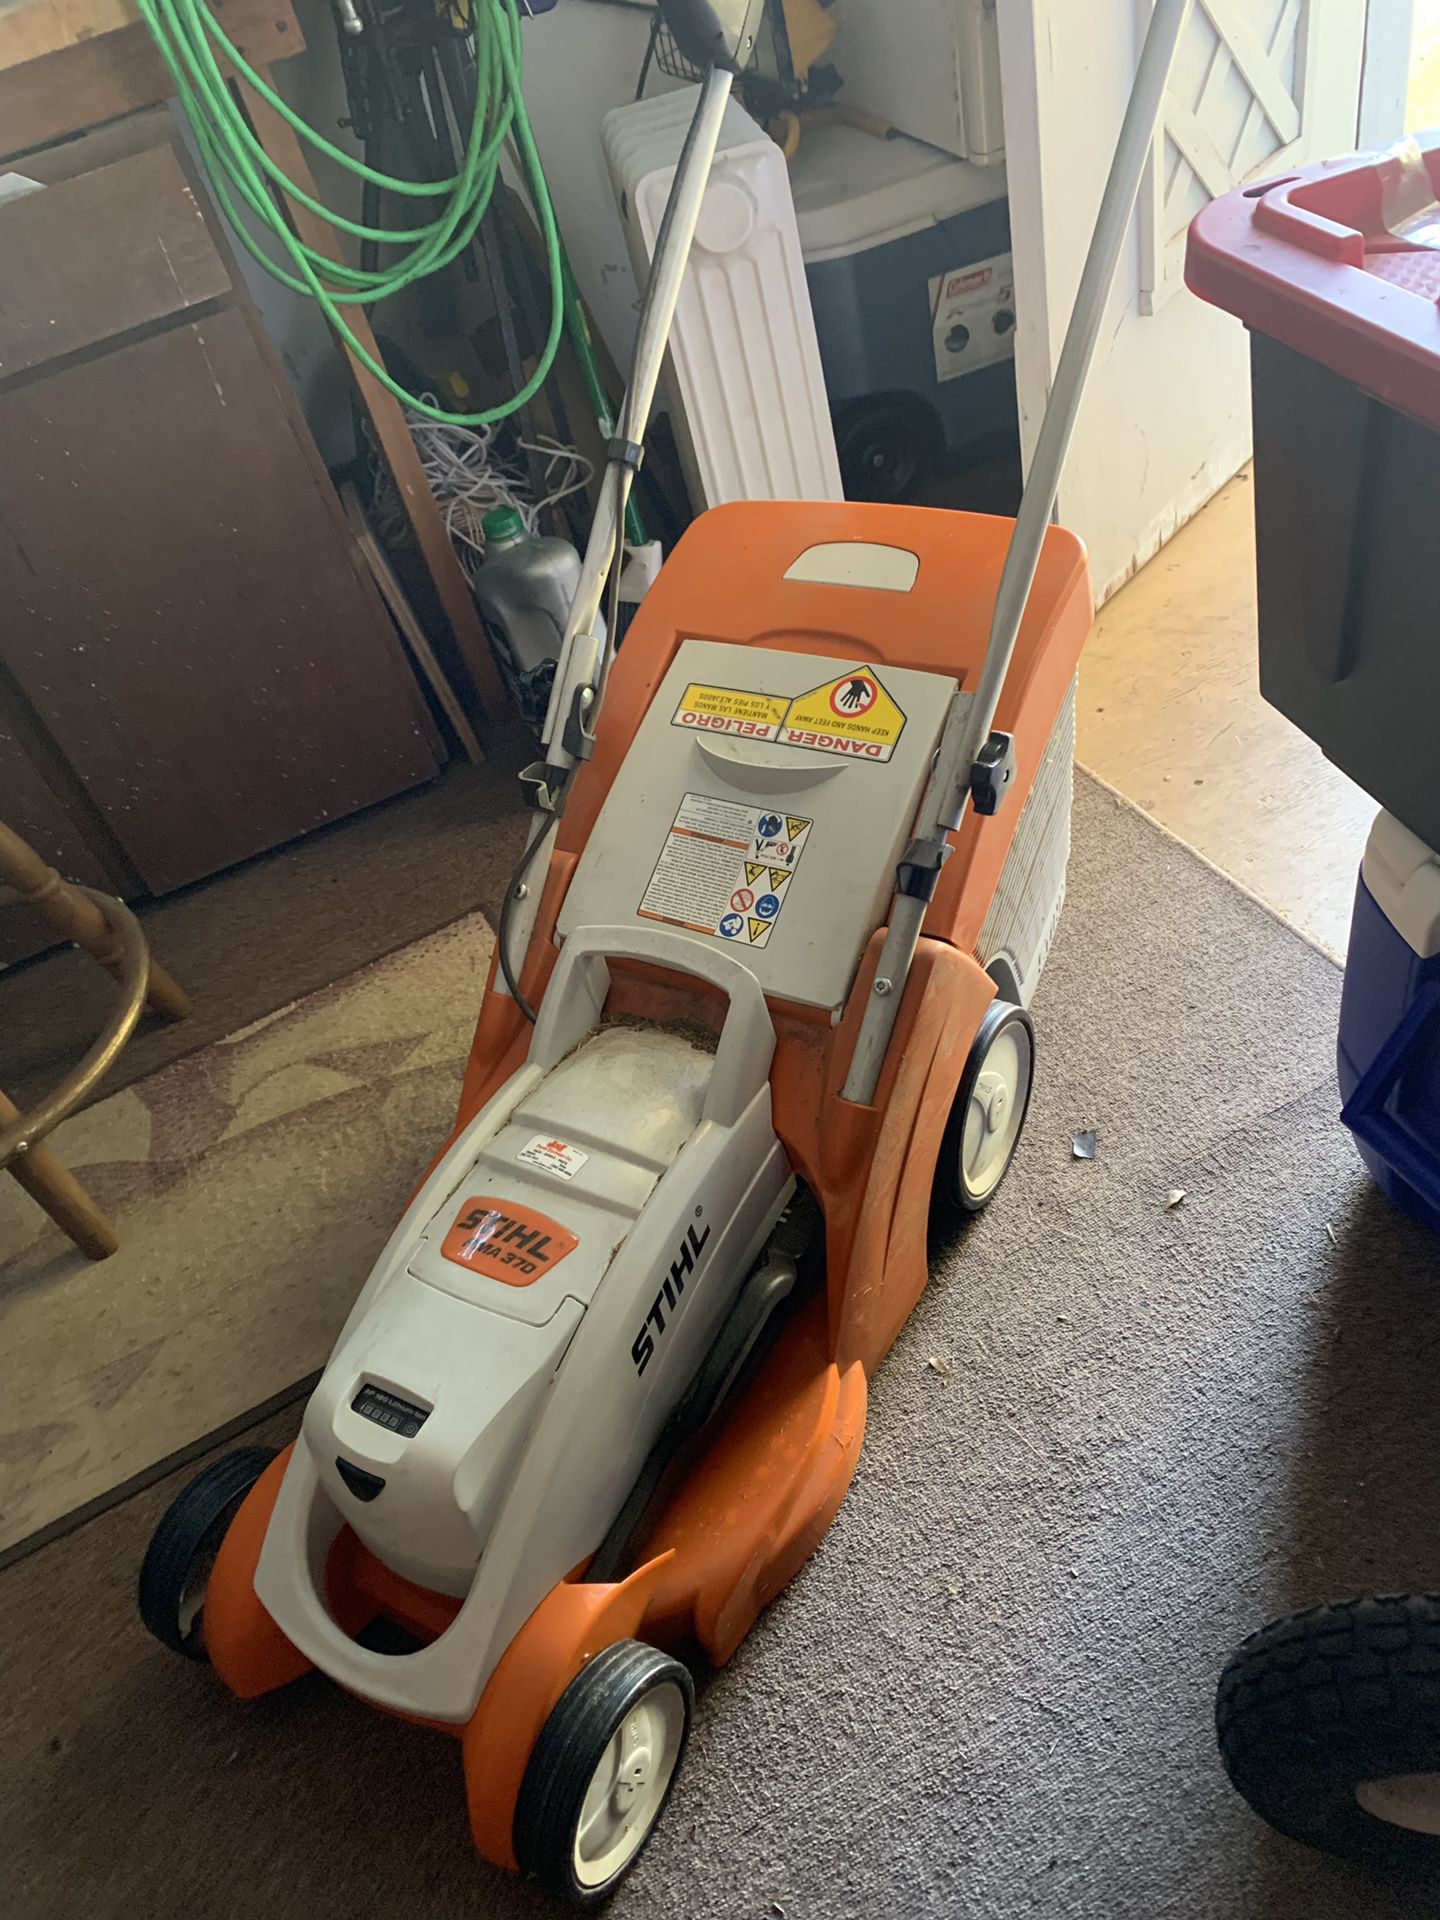 Stihl RMA 370 cordless mower with quick charger